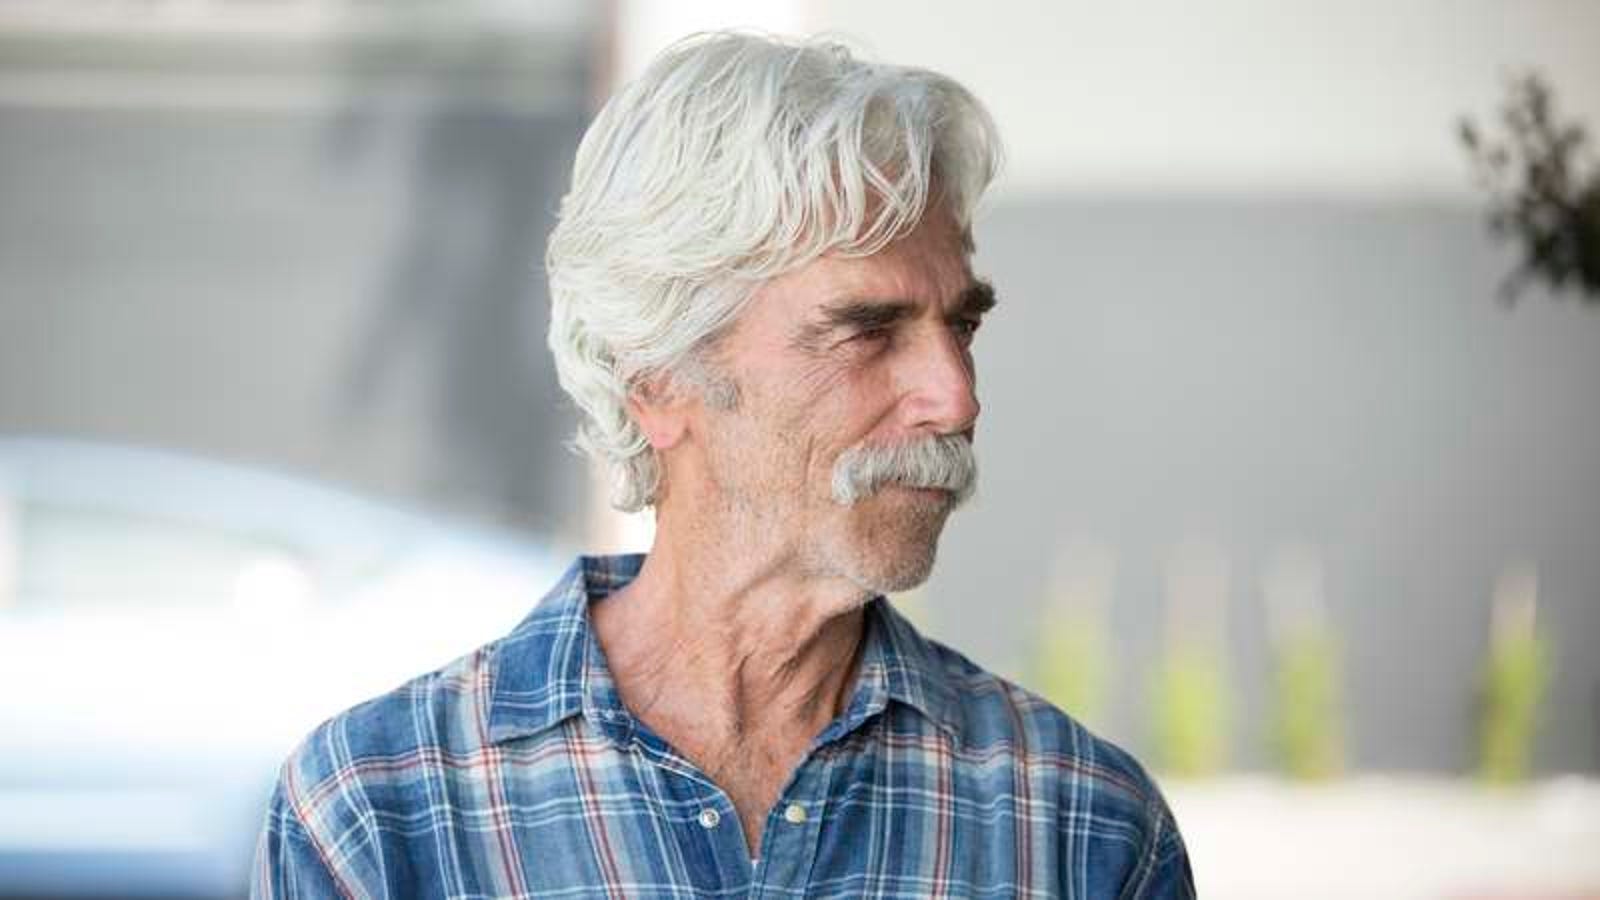 It’s great to see Sam Elliott in a starring role, but The Hero isn’t